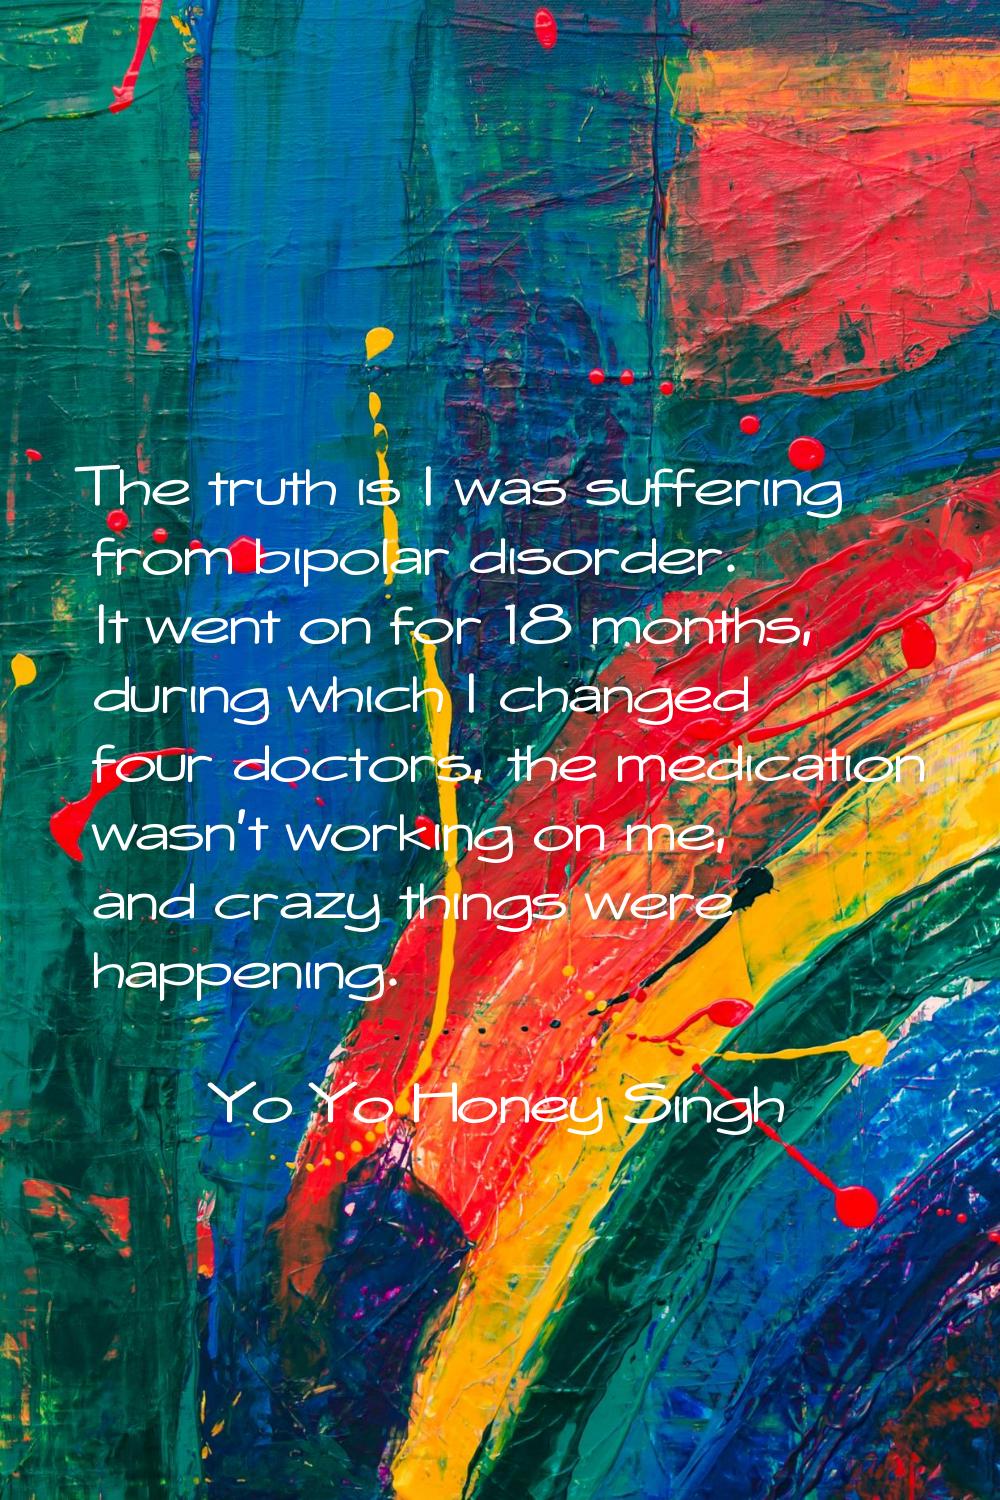 The truth is I was suffering from bipolar disorder. It went on for 18 months, during which I change